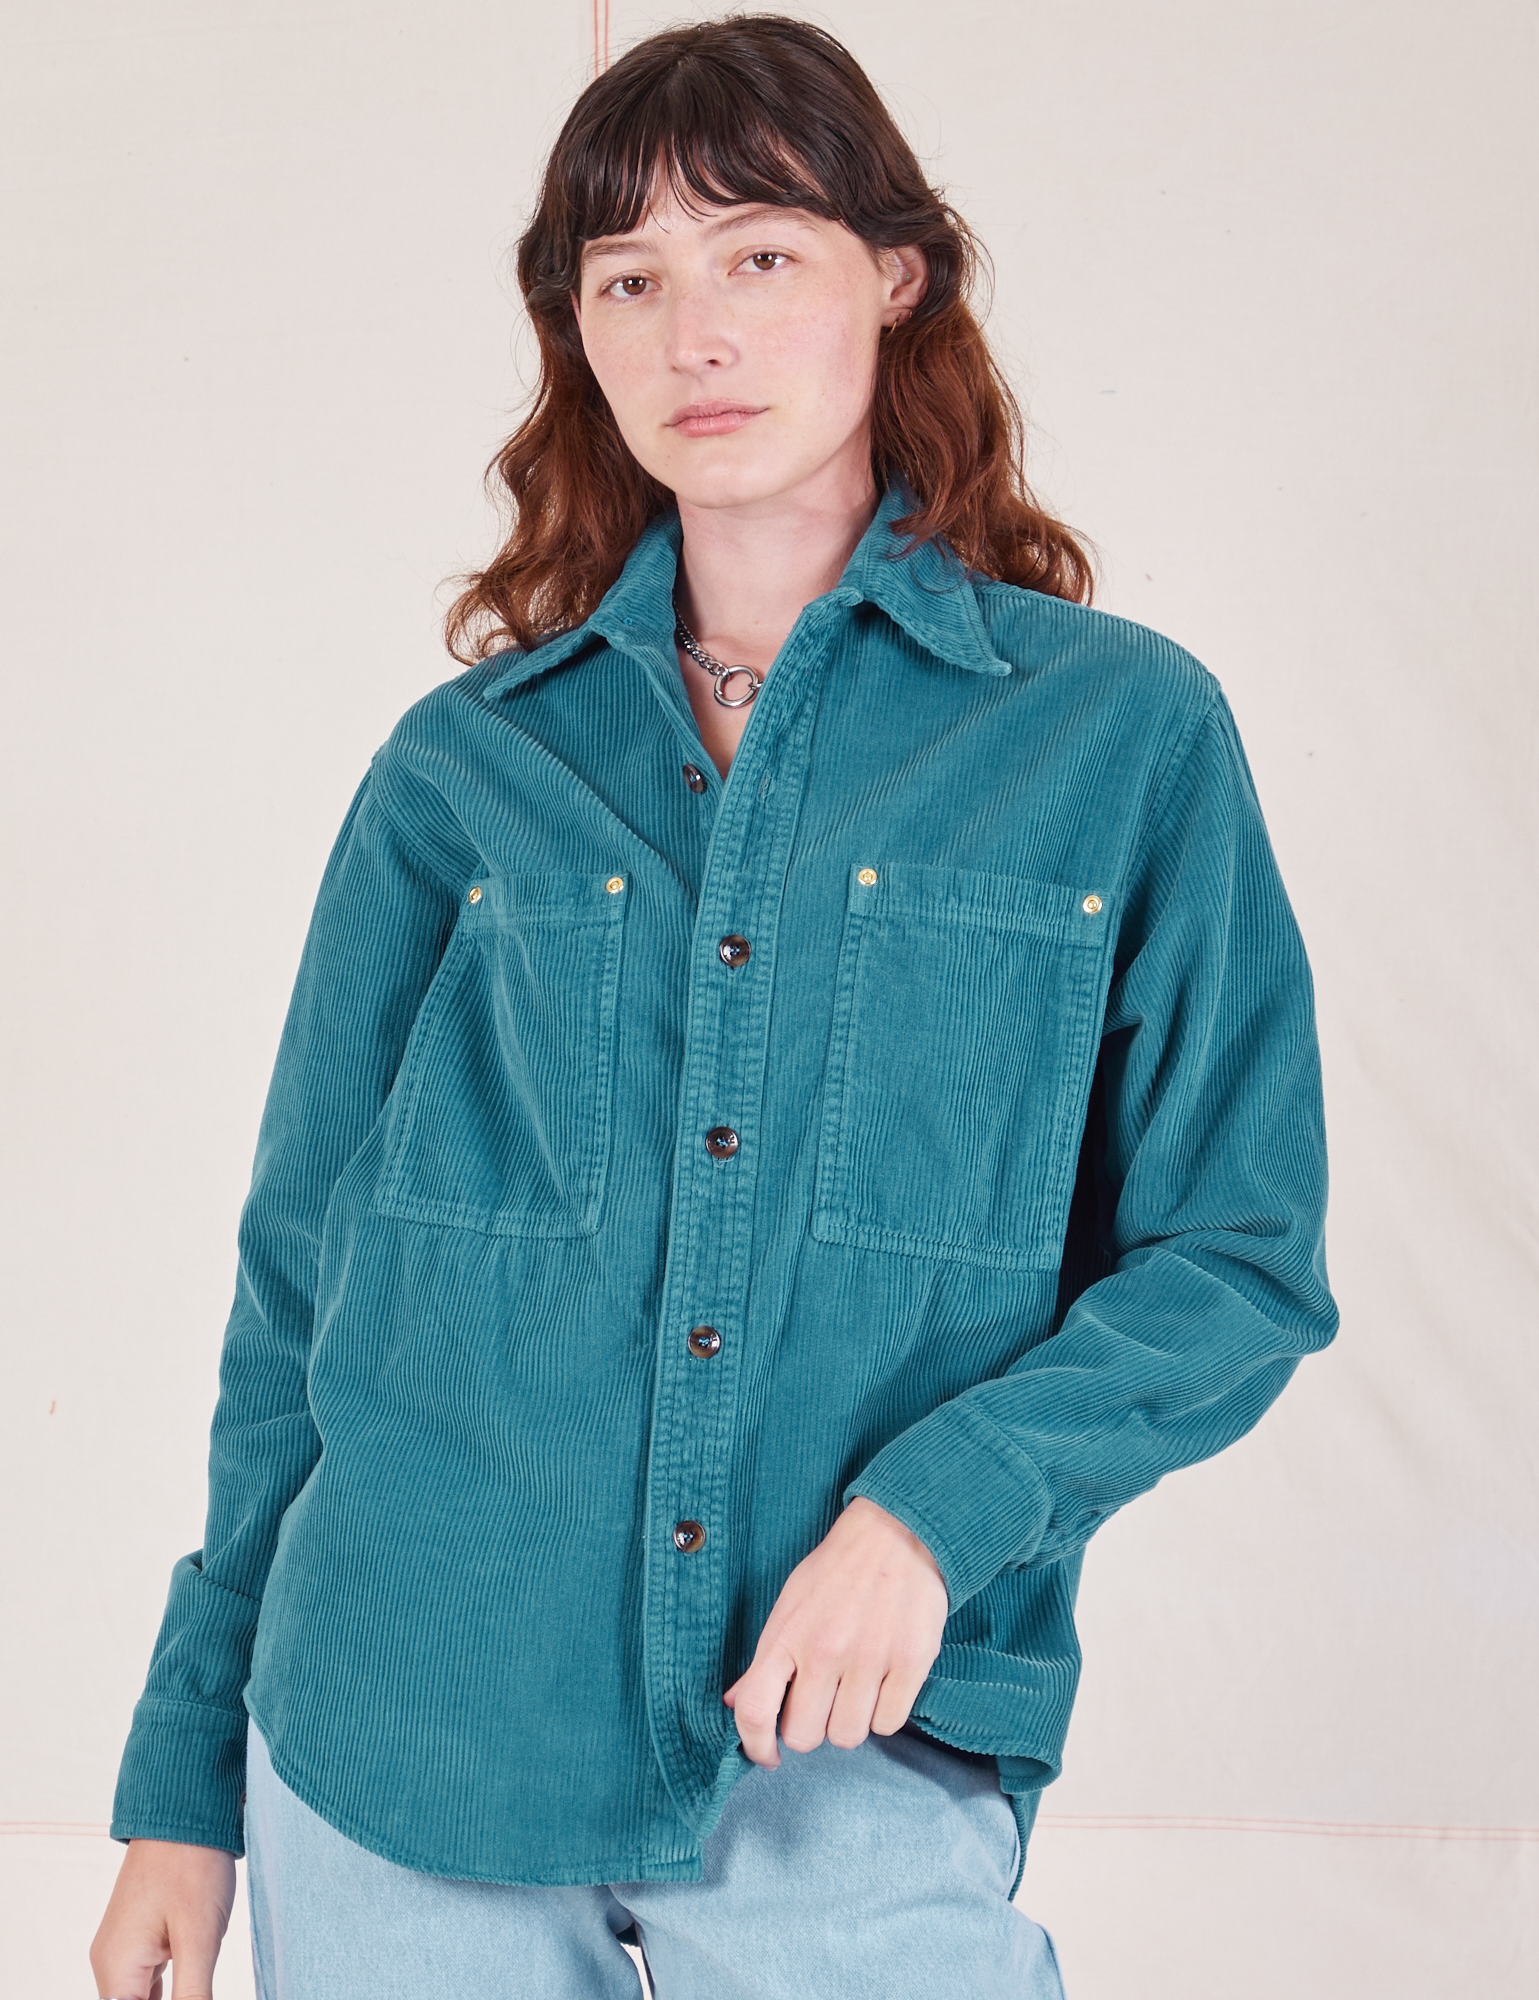 Alex is 5'8" and wearing P a buttoned up Corduroy Overshirt in Marine Blue